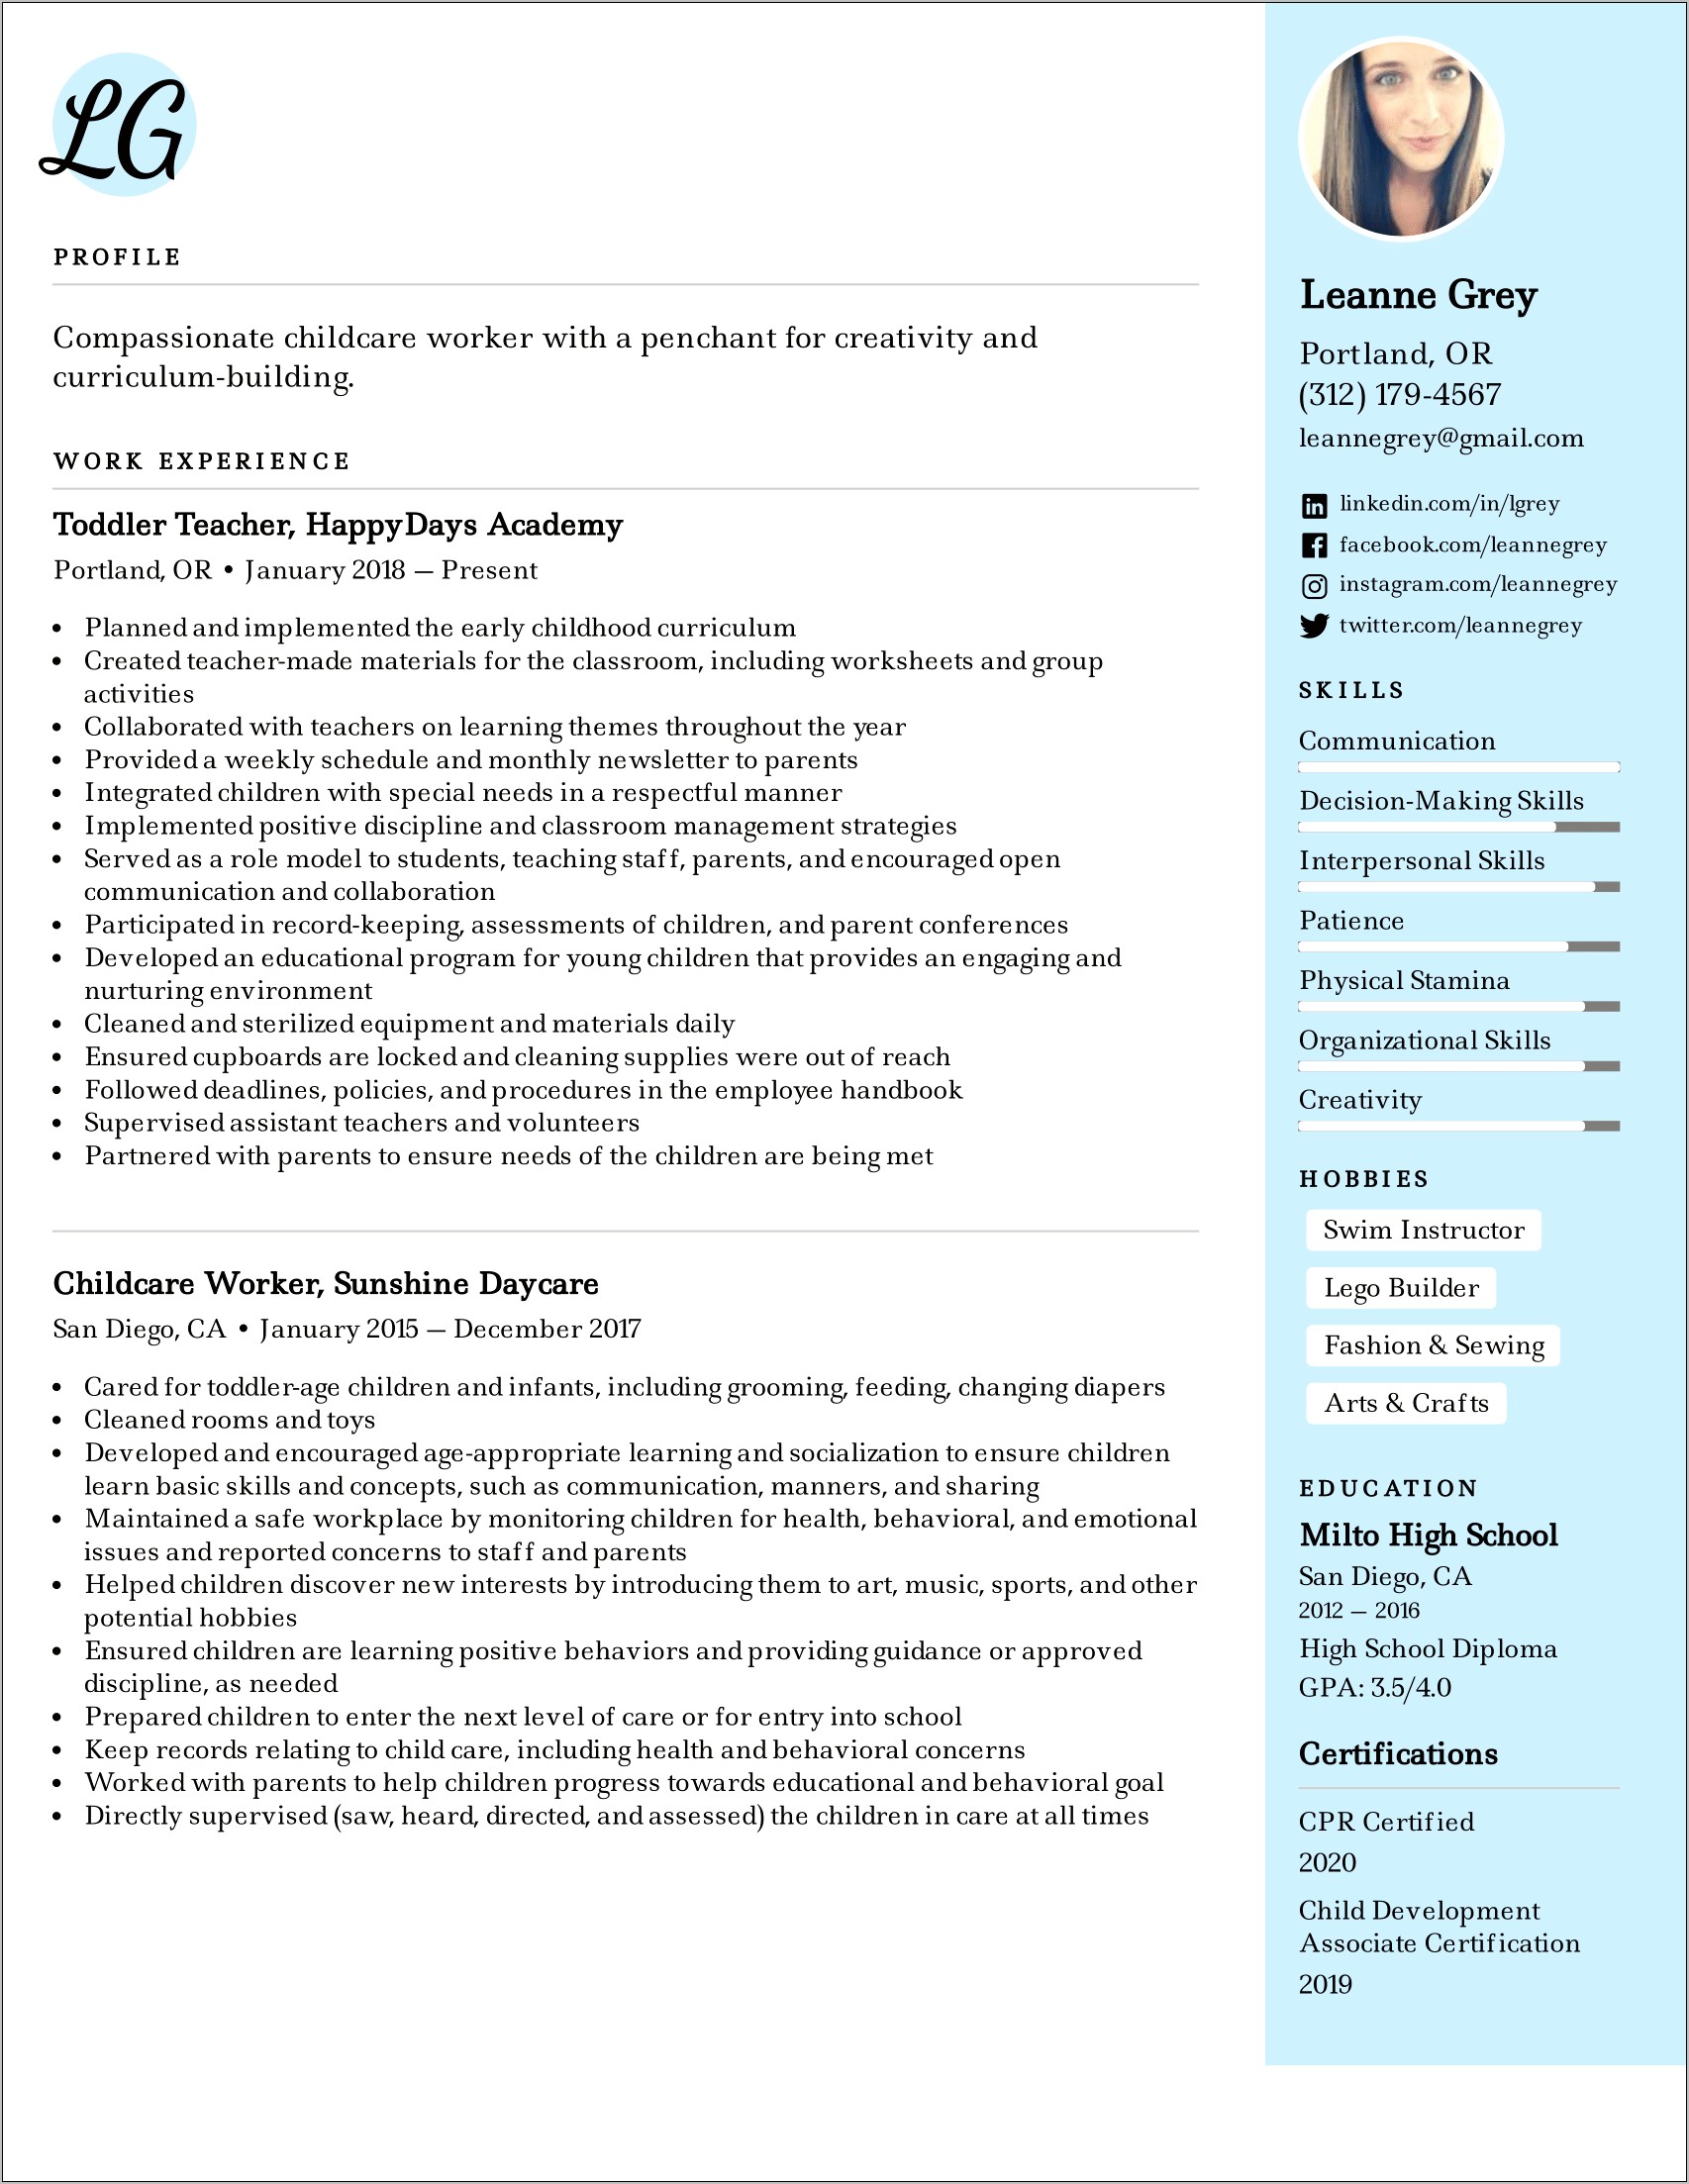 Job Resume Skills And Abilities Examples